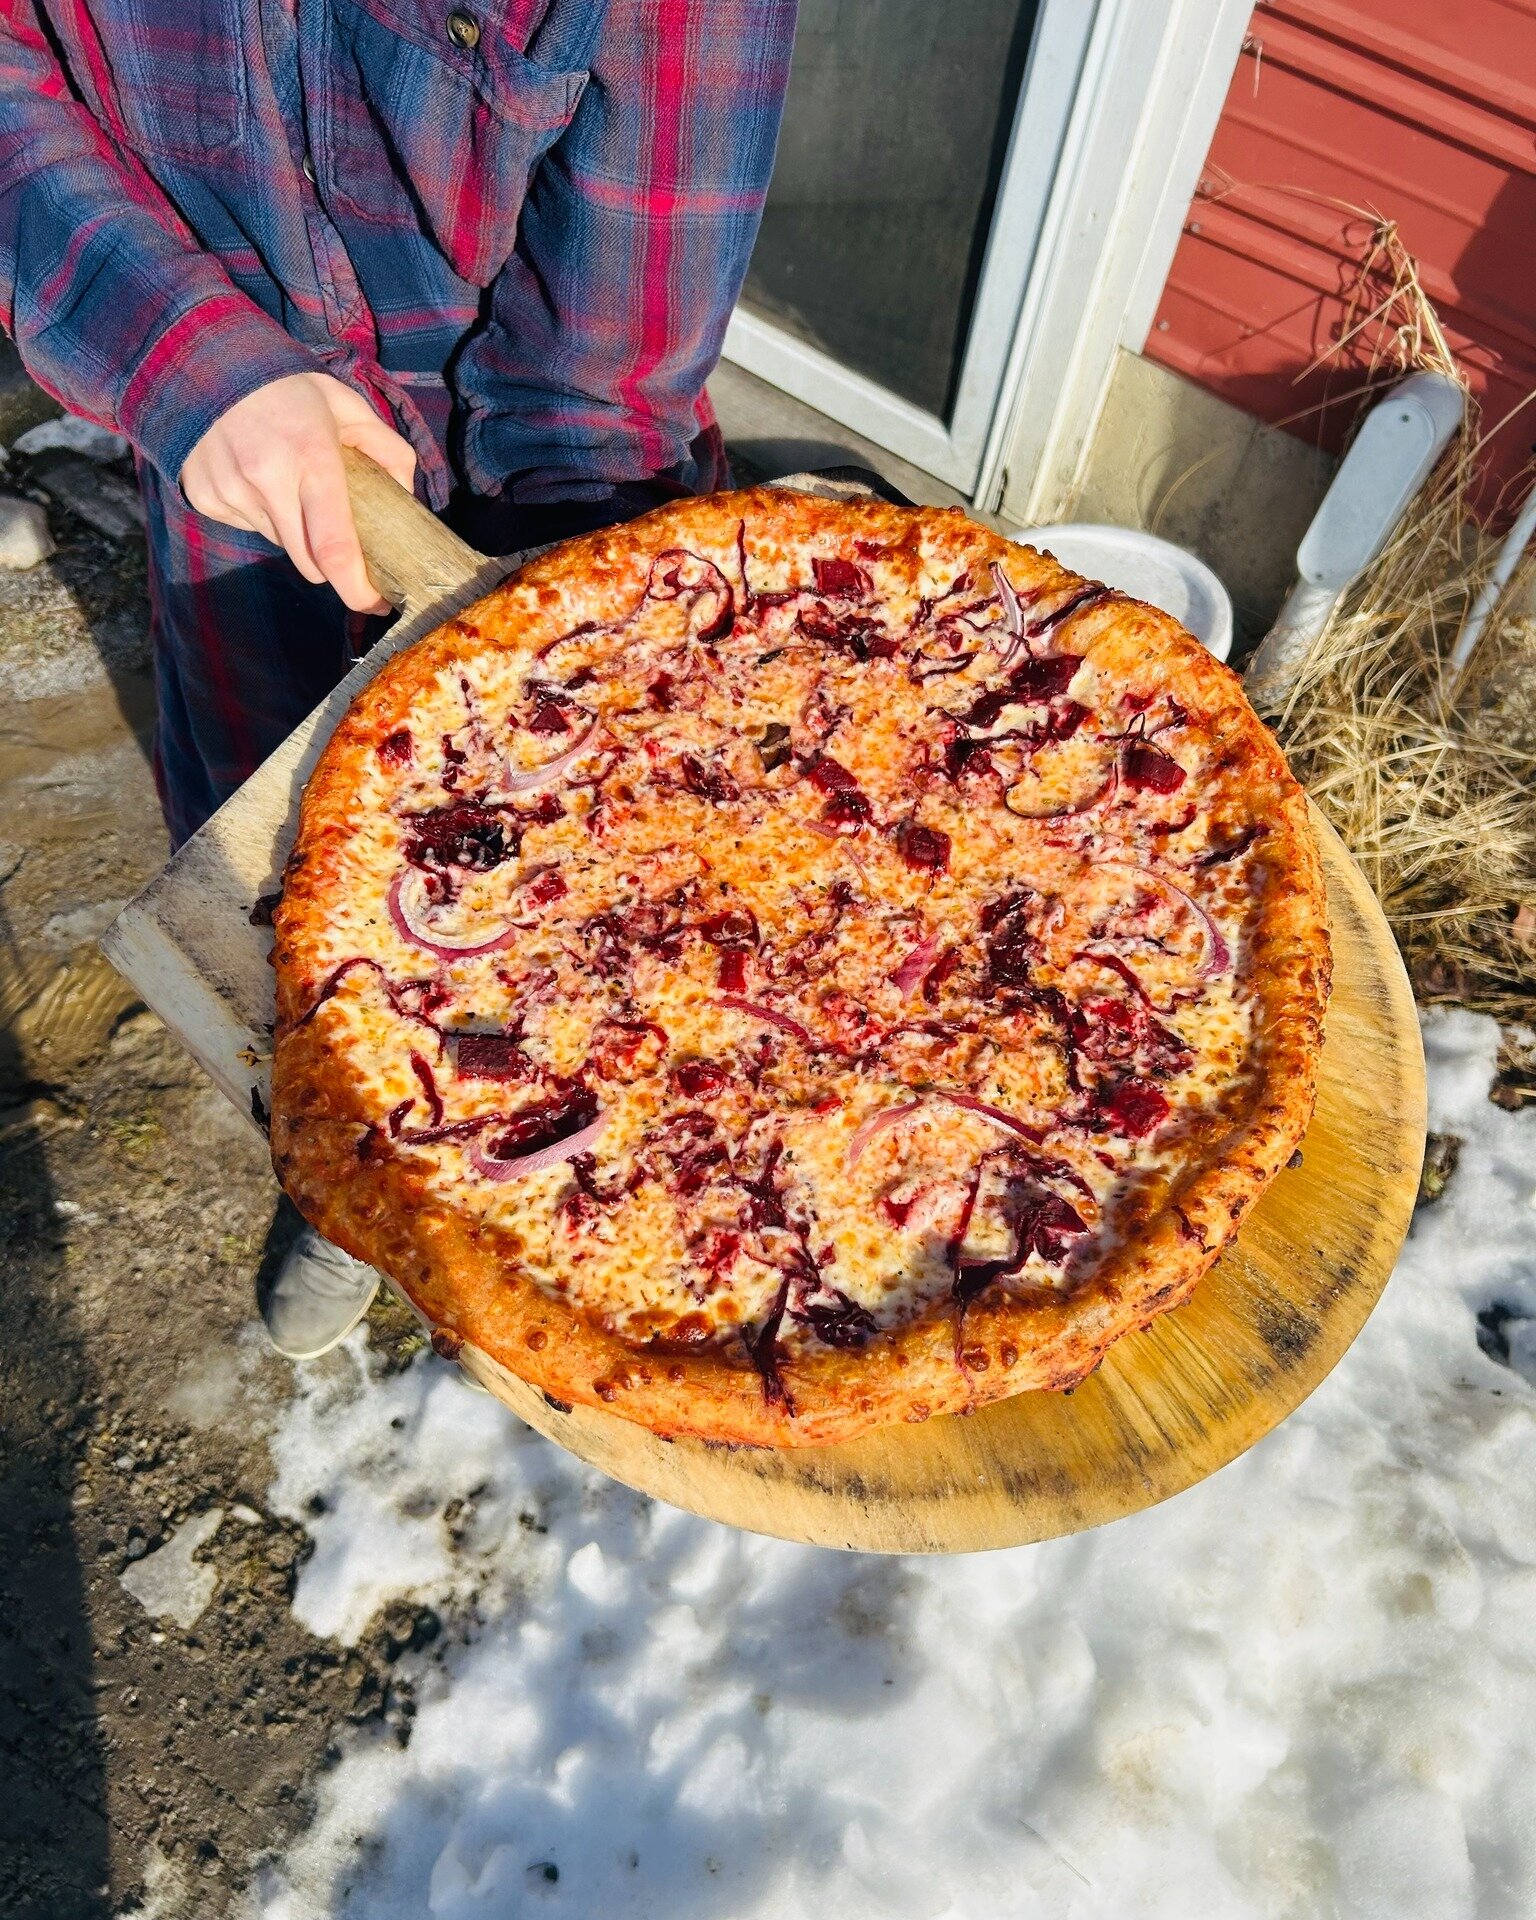 We would like to introduce you all to the Purple Beet-zza Eater! 

What *is* the Purple Beet-zza Eater you may ask? It's this Friday's pizza special! Start with one of our delicious pizzas made with our handmade thin crust and fresh homemade sauce, s